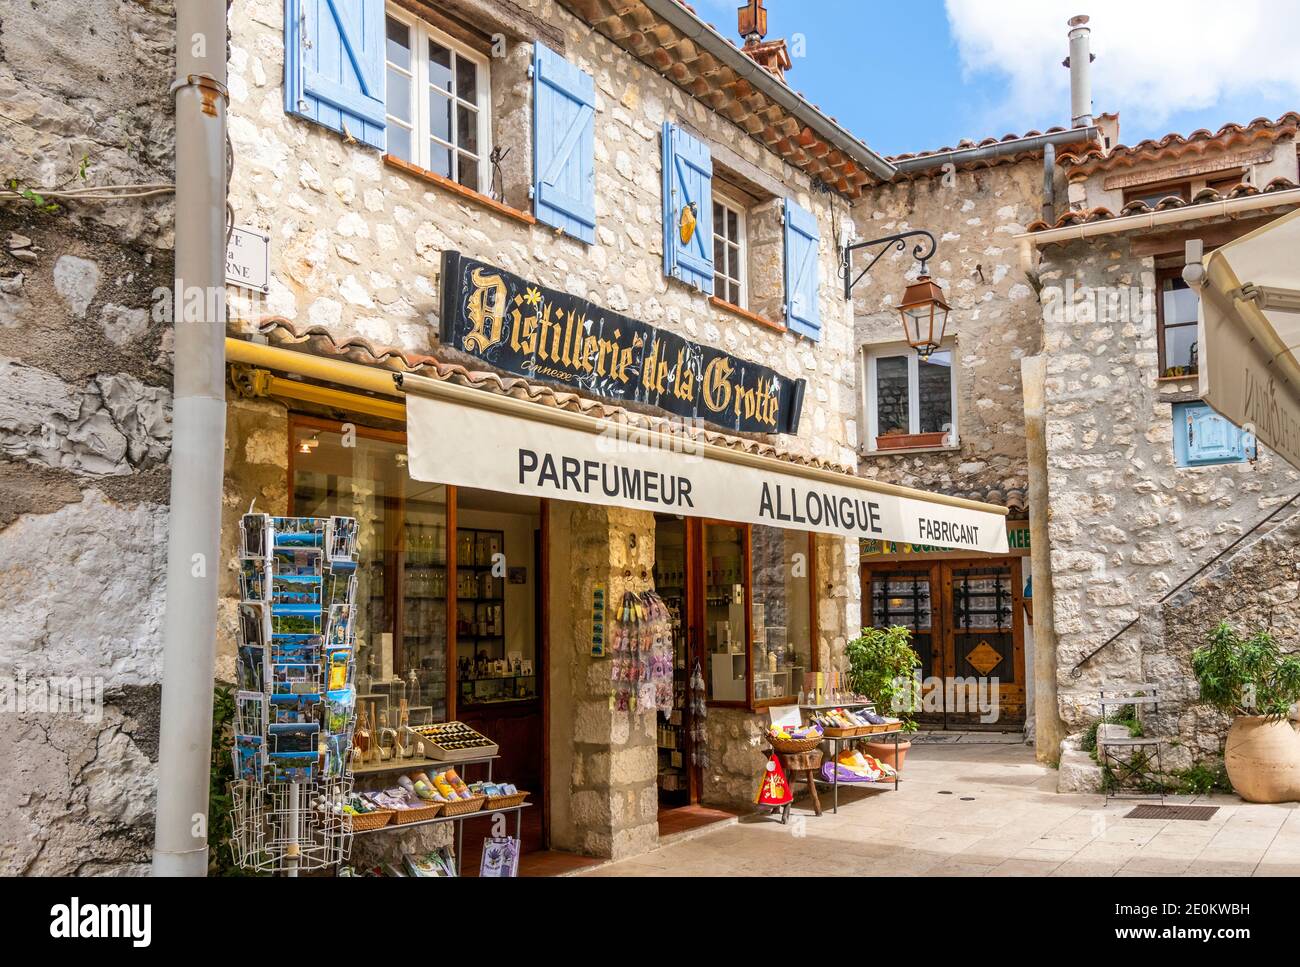 A picturesque, quaint store in the medieval hilltop village of Gourdon, in the Alpes Maritimes area of Southern France. Stock Photo